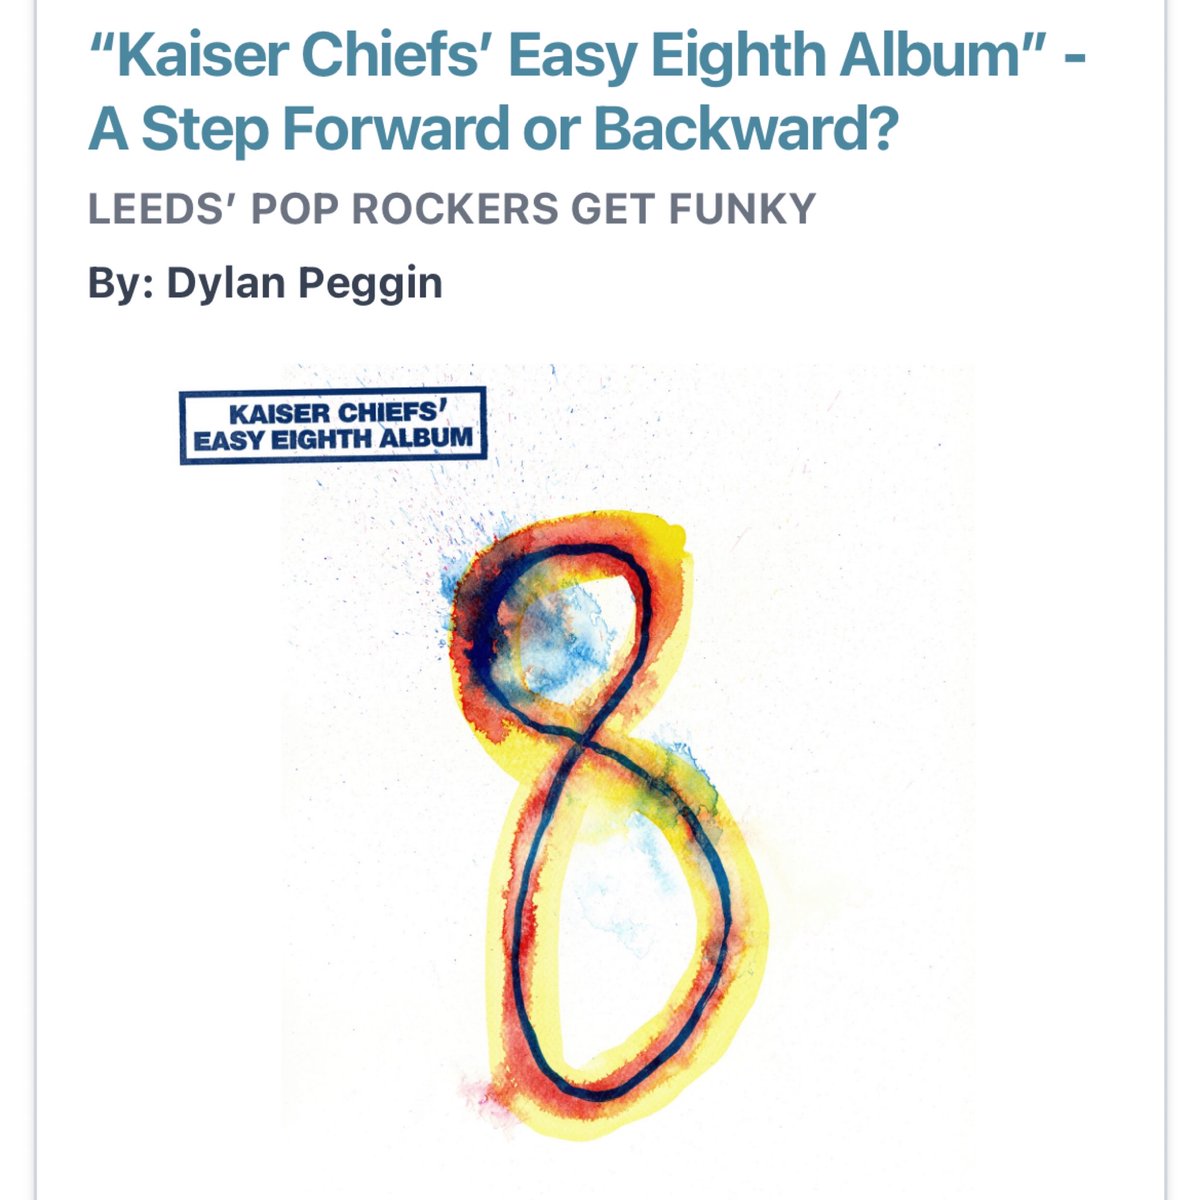 One of my more critical assessments is up on @tracking_angle discussing the newest offering from Kaiser Chiefs. Give it a read! #kaiserchiefs #albumreview #trackingangle #therecordspinner #keeptherecordspinning trackingangle.com/music/kaiser-c…